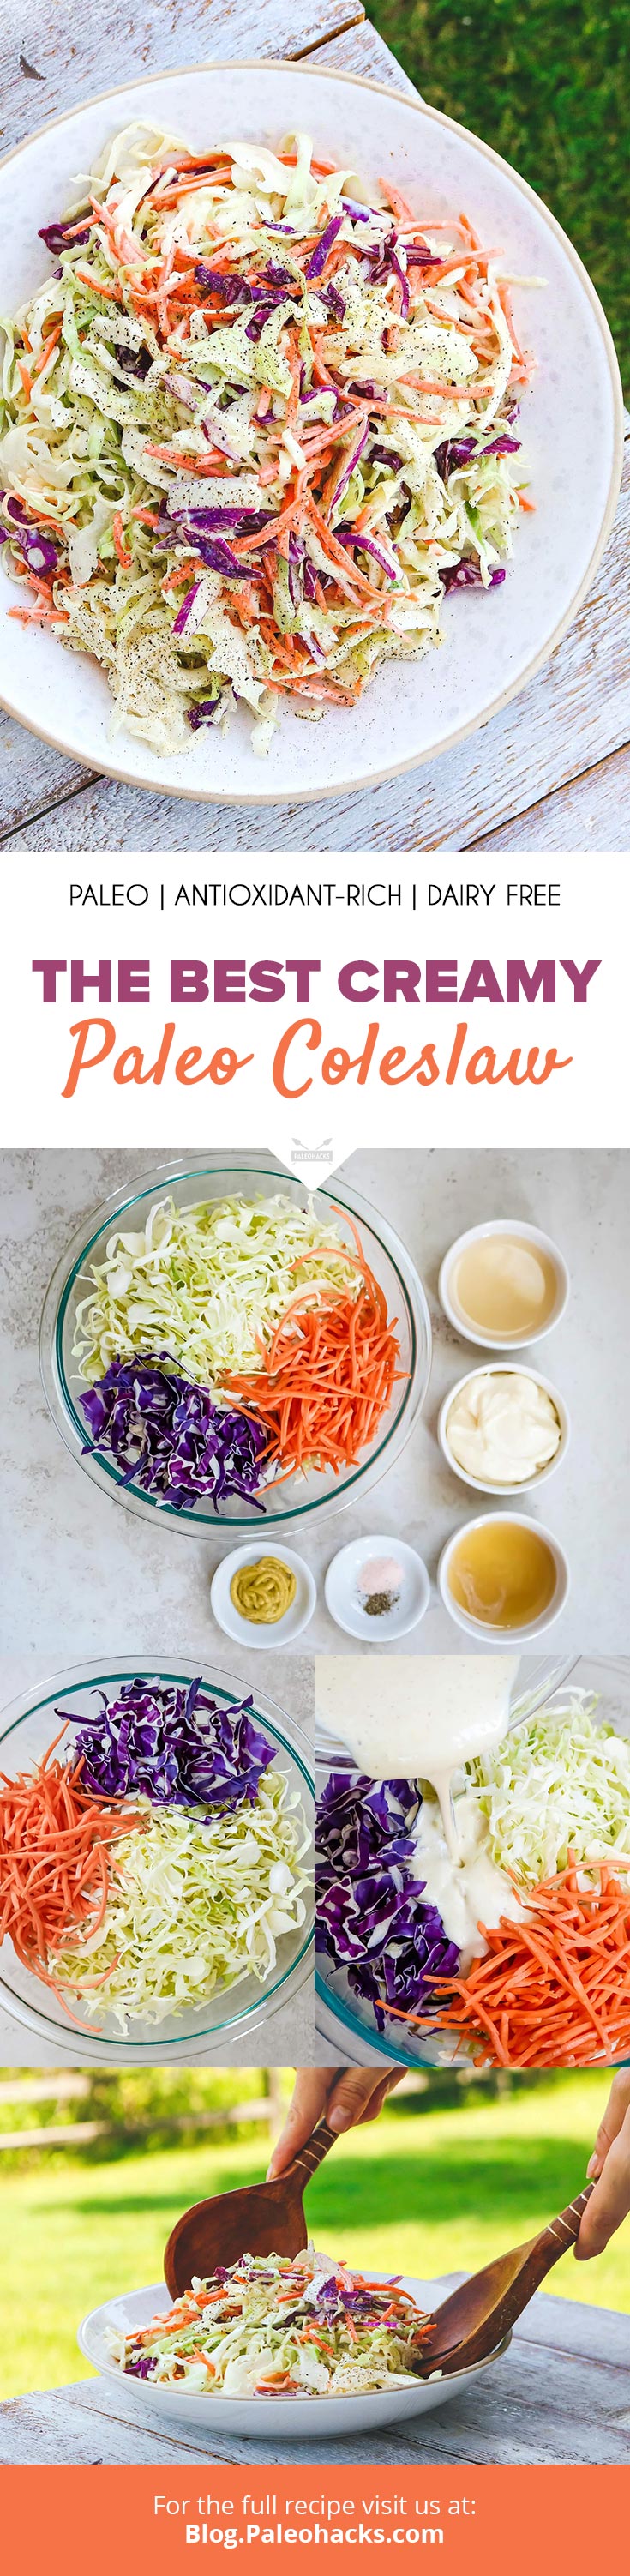 Planning a backyard barbecue? Check out this Paleo Coleslaw made with antioxidant-rich cabbage smothered in creamy honey Dijon dressing.